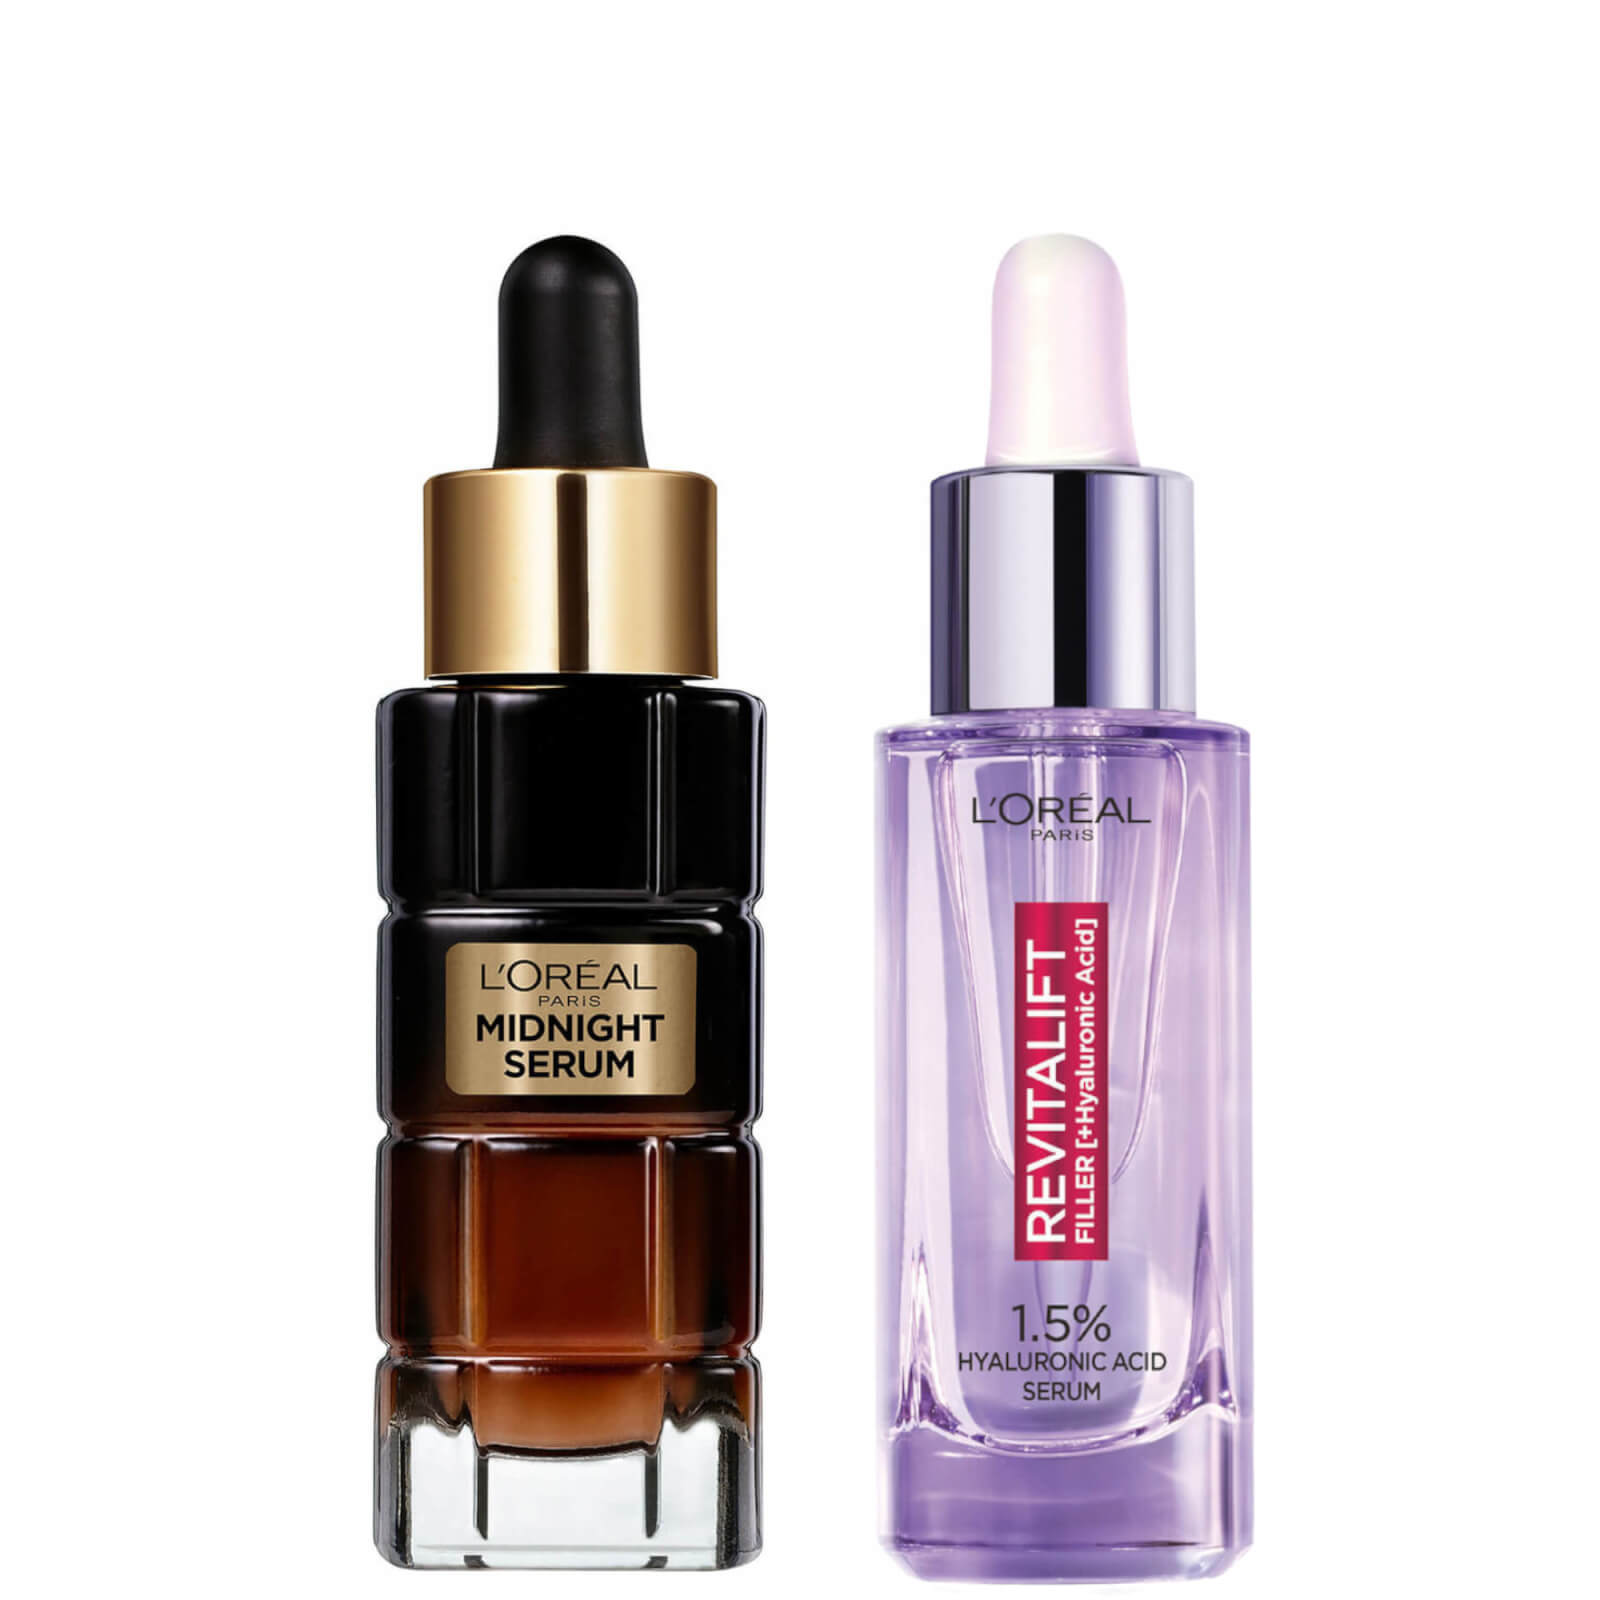 Image of L'Oréal Paris Plump and Glow Serums Bundle with 1.5% Hyaluronic Acid, Vitamin E and Anti-Oxidants